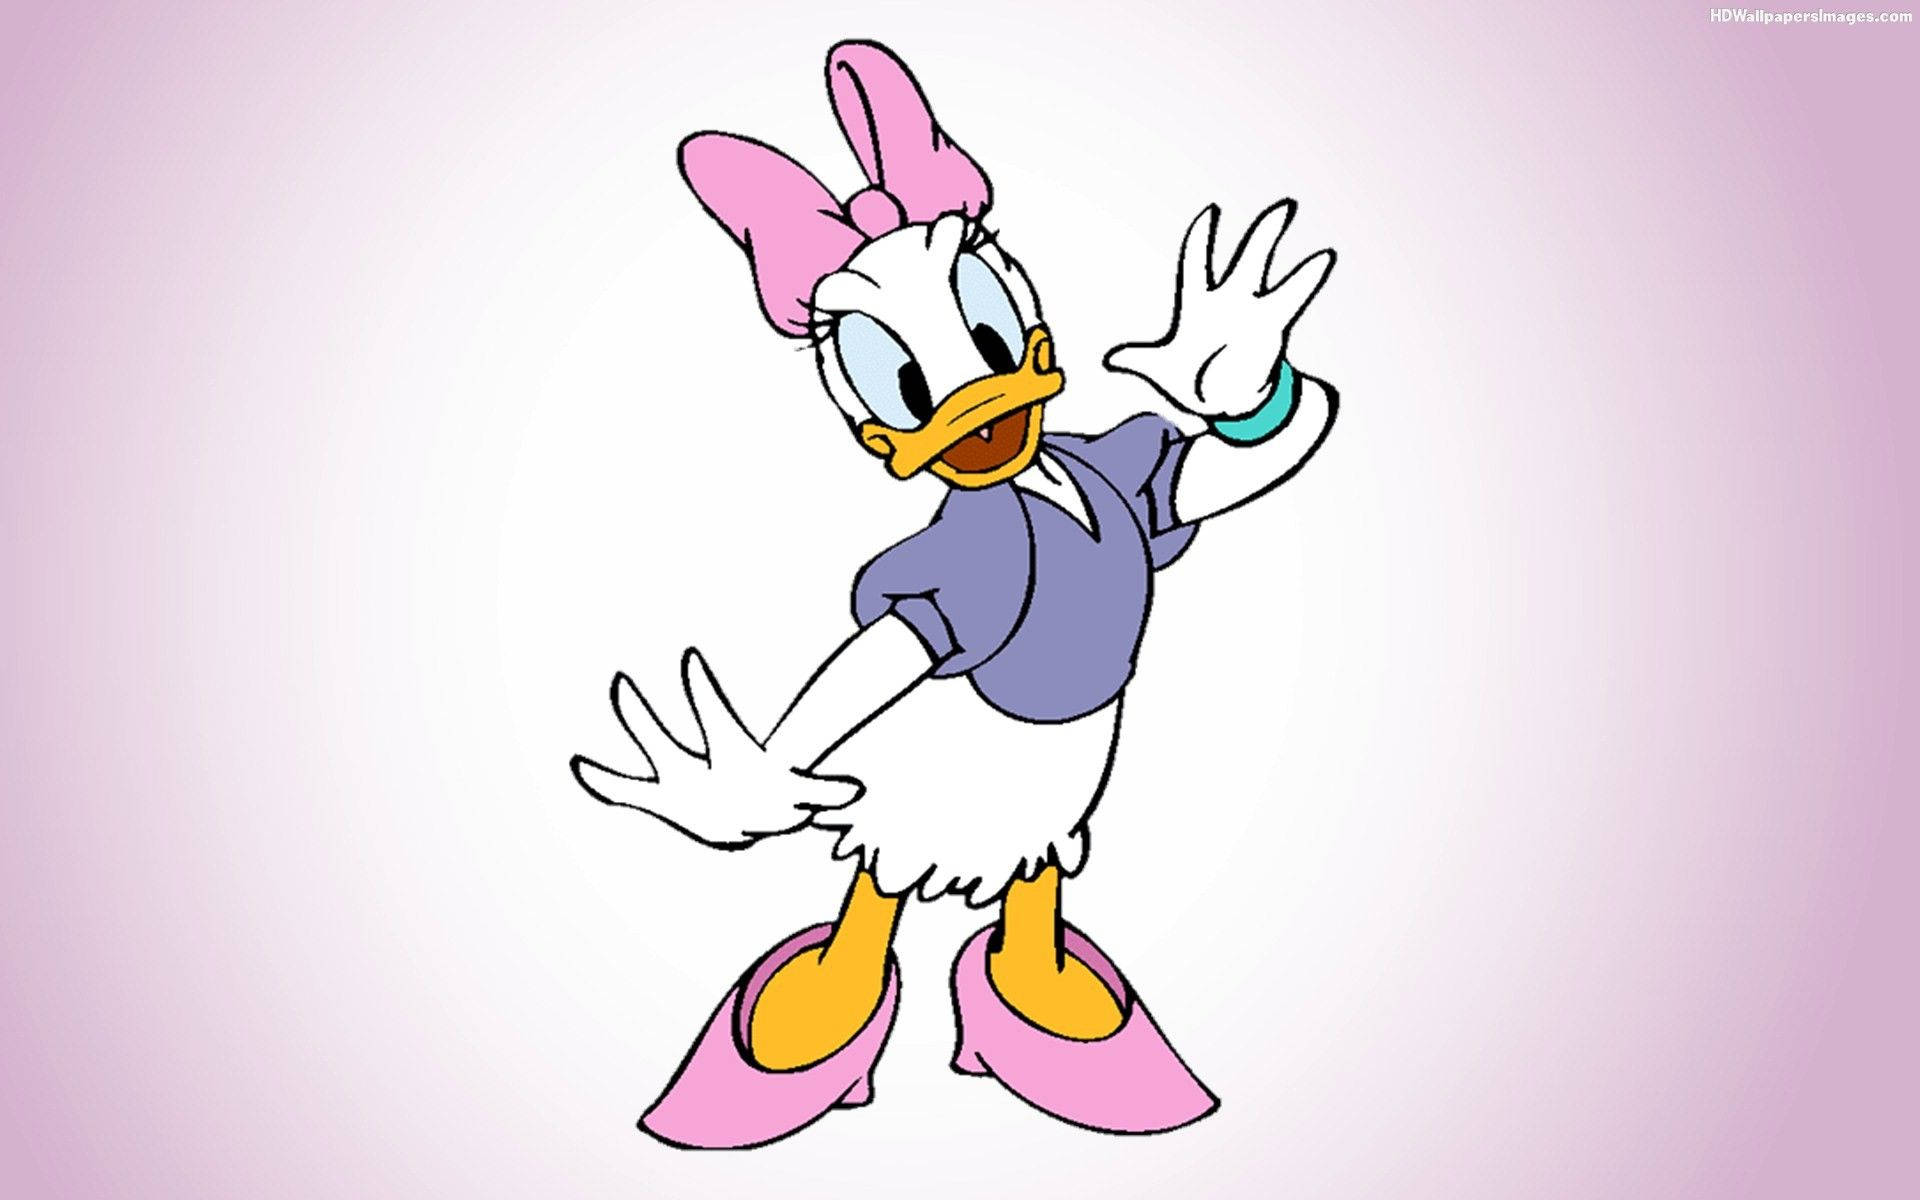 Top 999+ Daisy Duck Wallpapers Full HD, 4K✅Free to Use